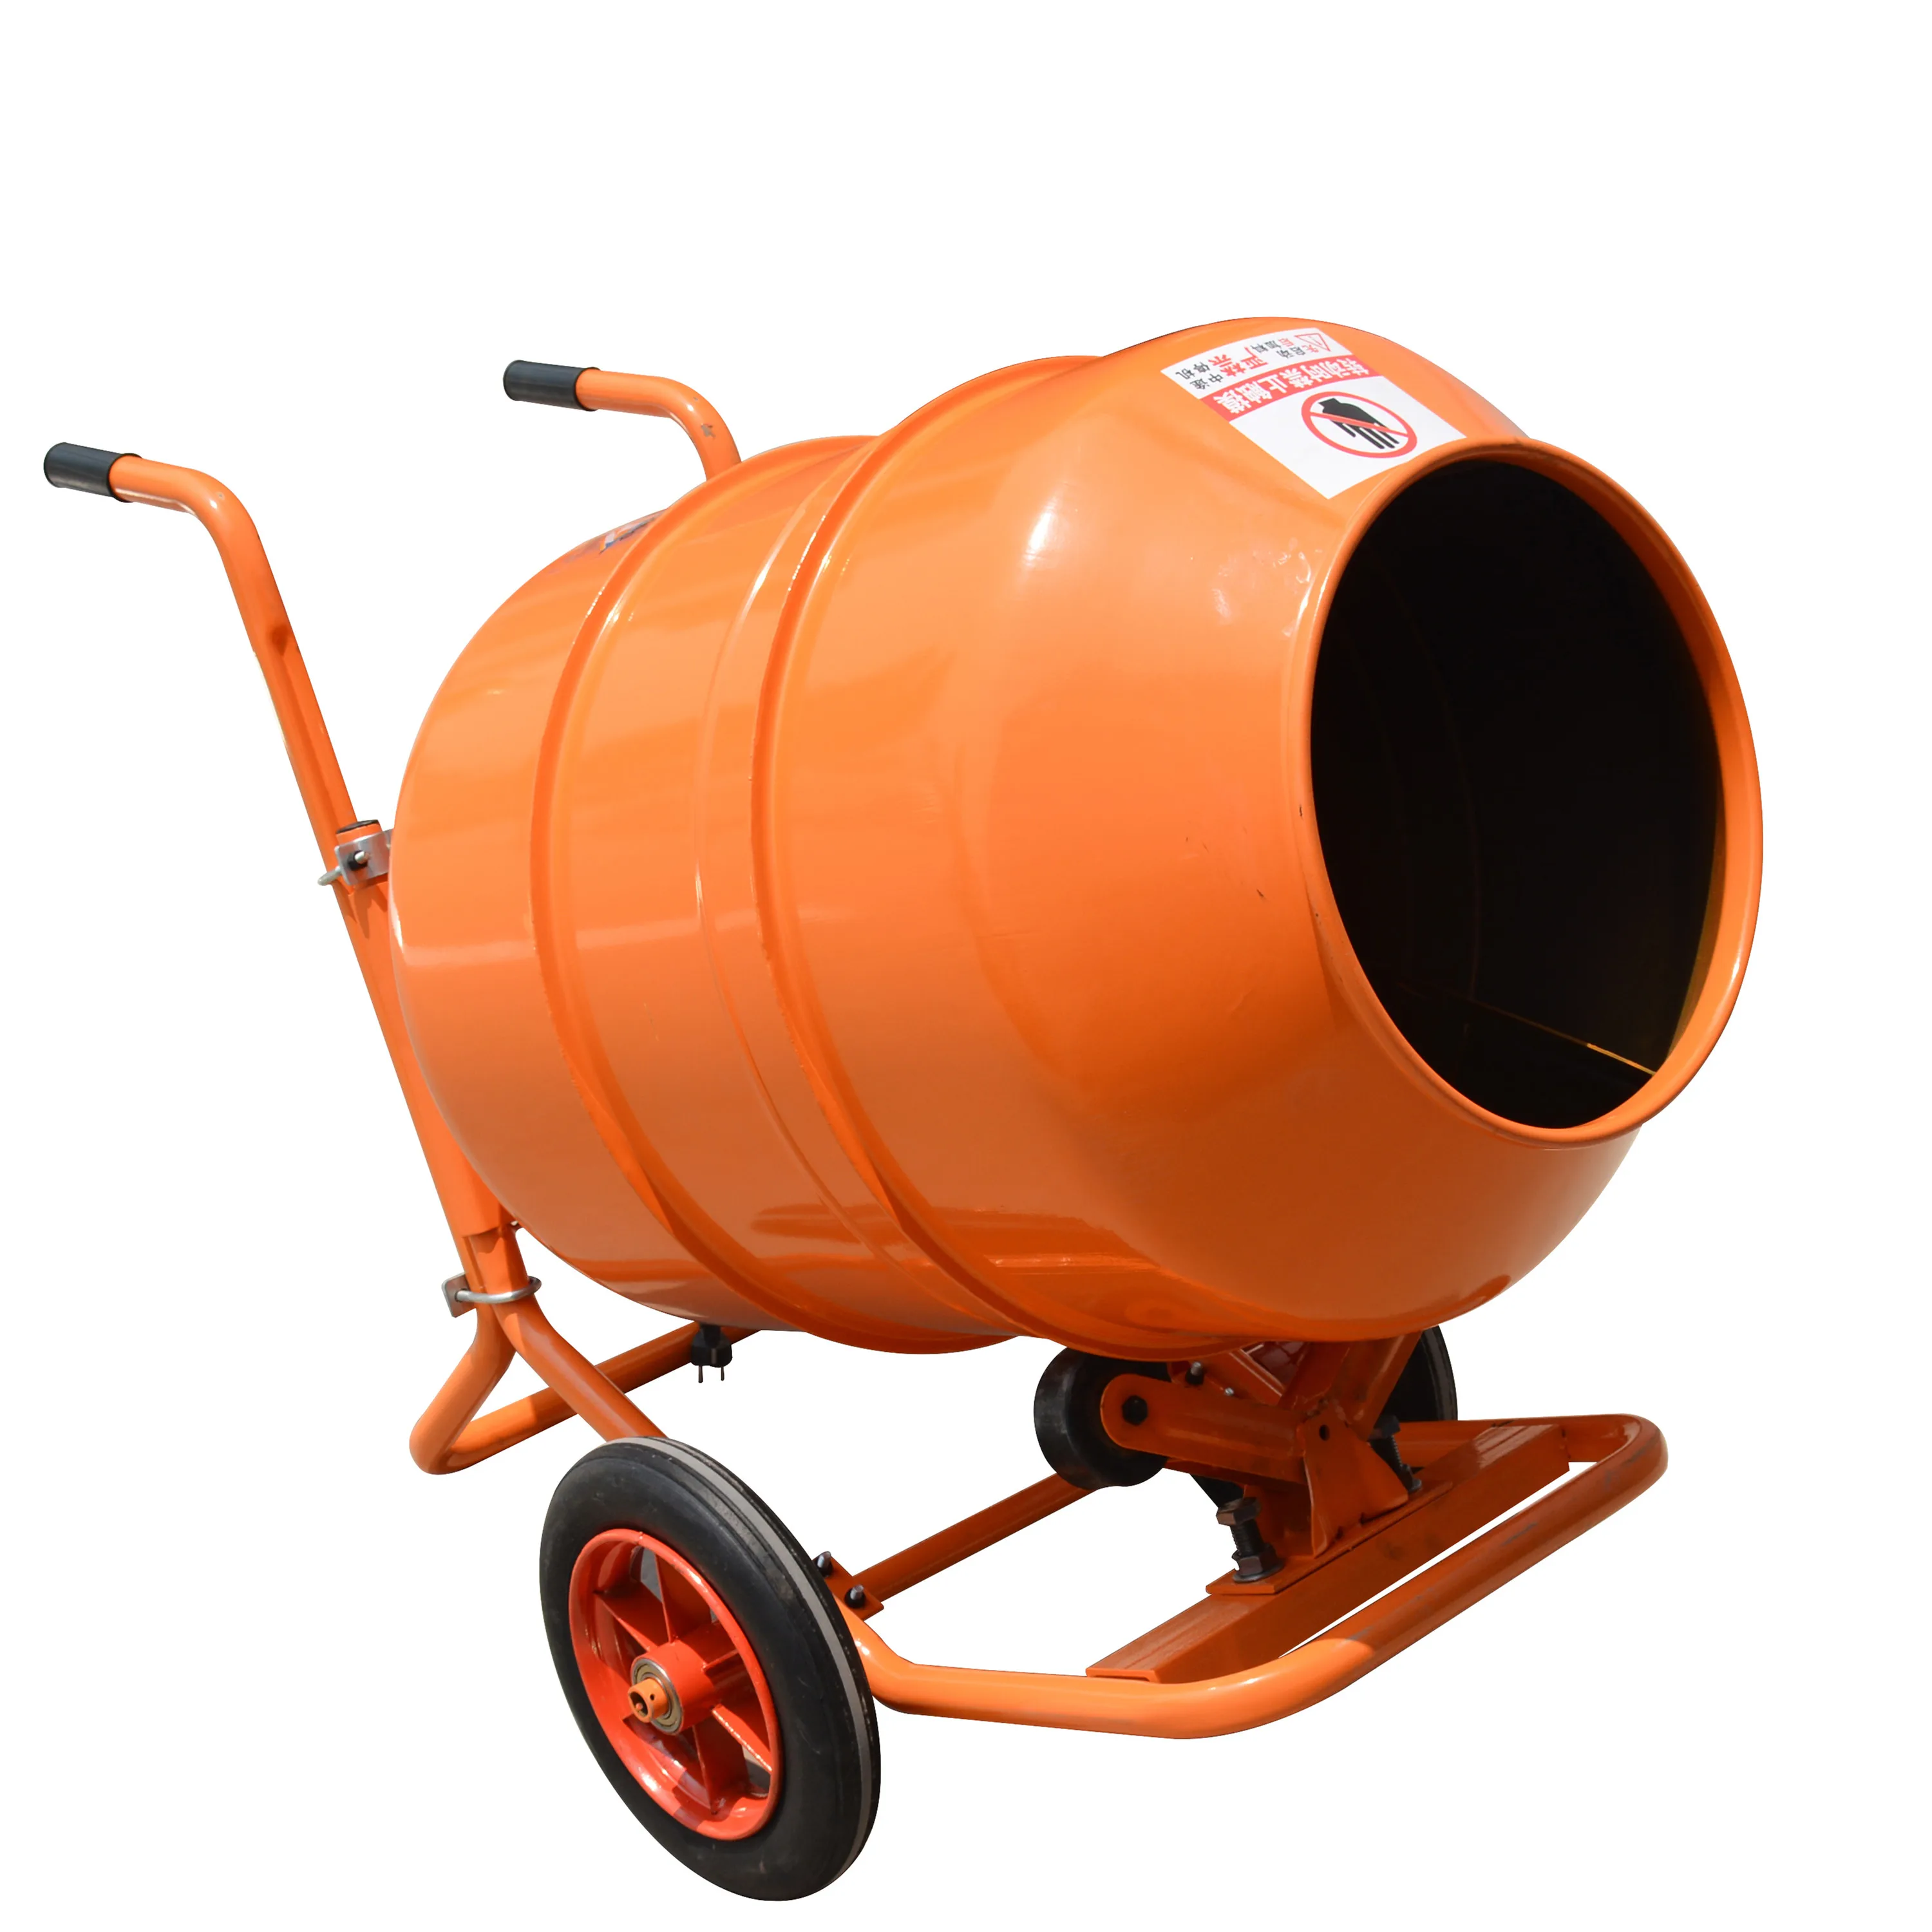 Best Selling Small Concrete Mixer - Buy Small Concrete Mixer,Small